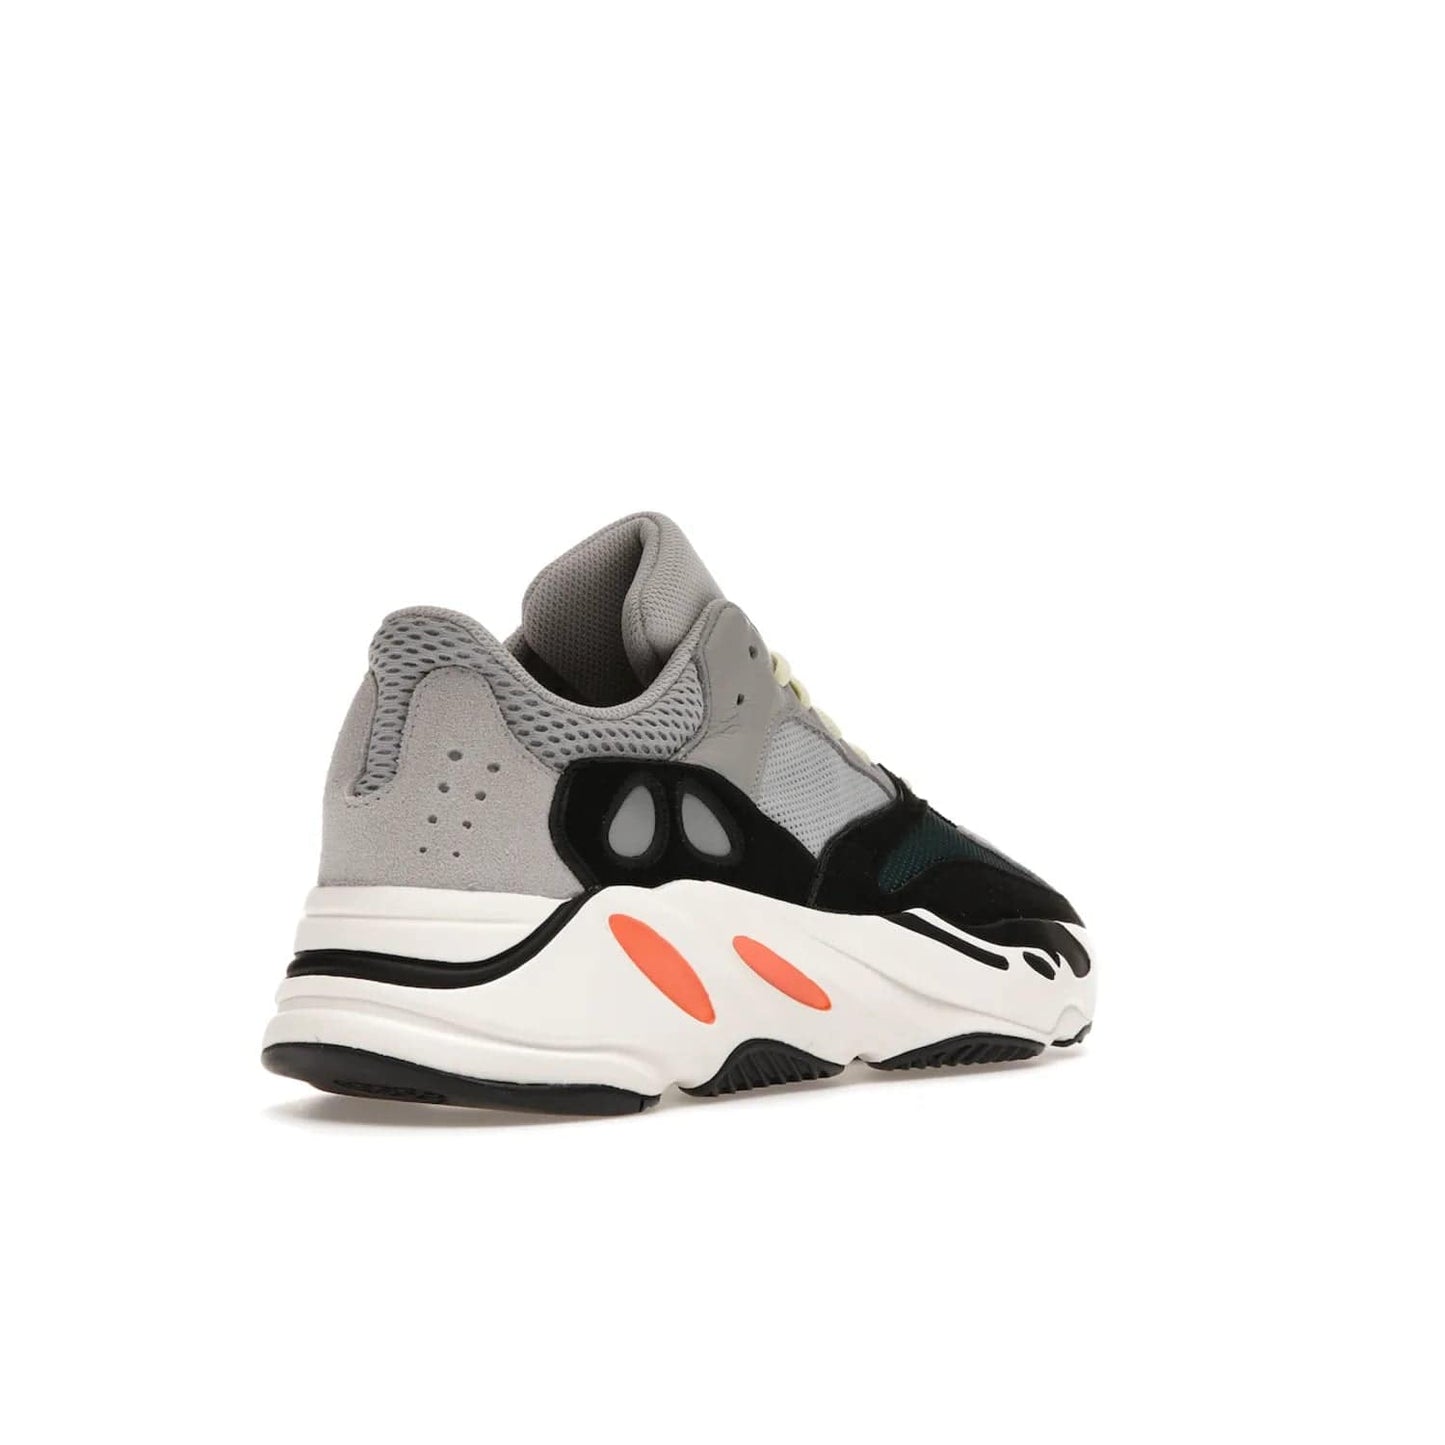 adidas Yeezy Boost 700 Wave Runner - Image 32 - Only at www.BallersClubKickz.com - Shop the iconic adidas Yeezy Boost 700 Wave Runner. Featuring grey mesh and leather upper, black suede overlays, teal mesh underlays, and signature Boost sole. Be bold & make a statement.